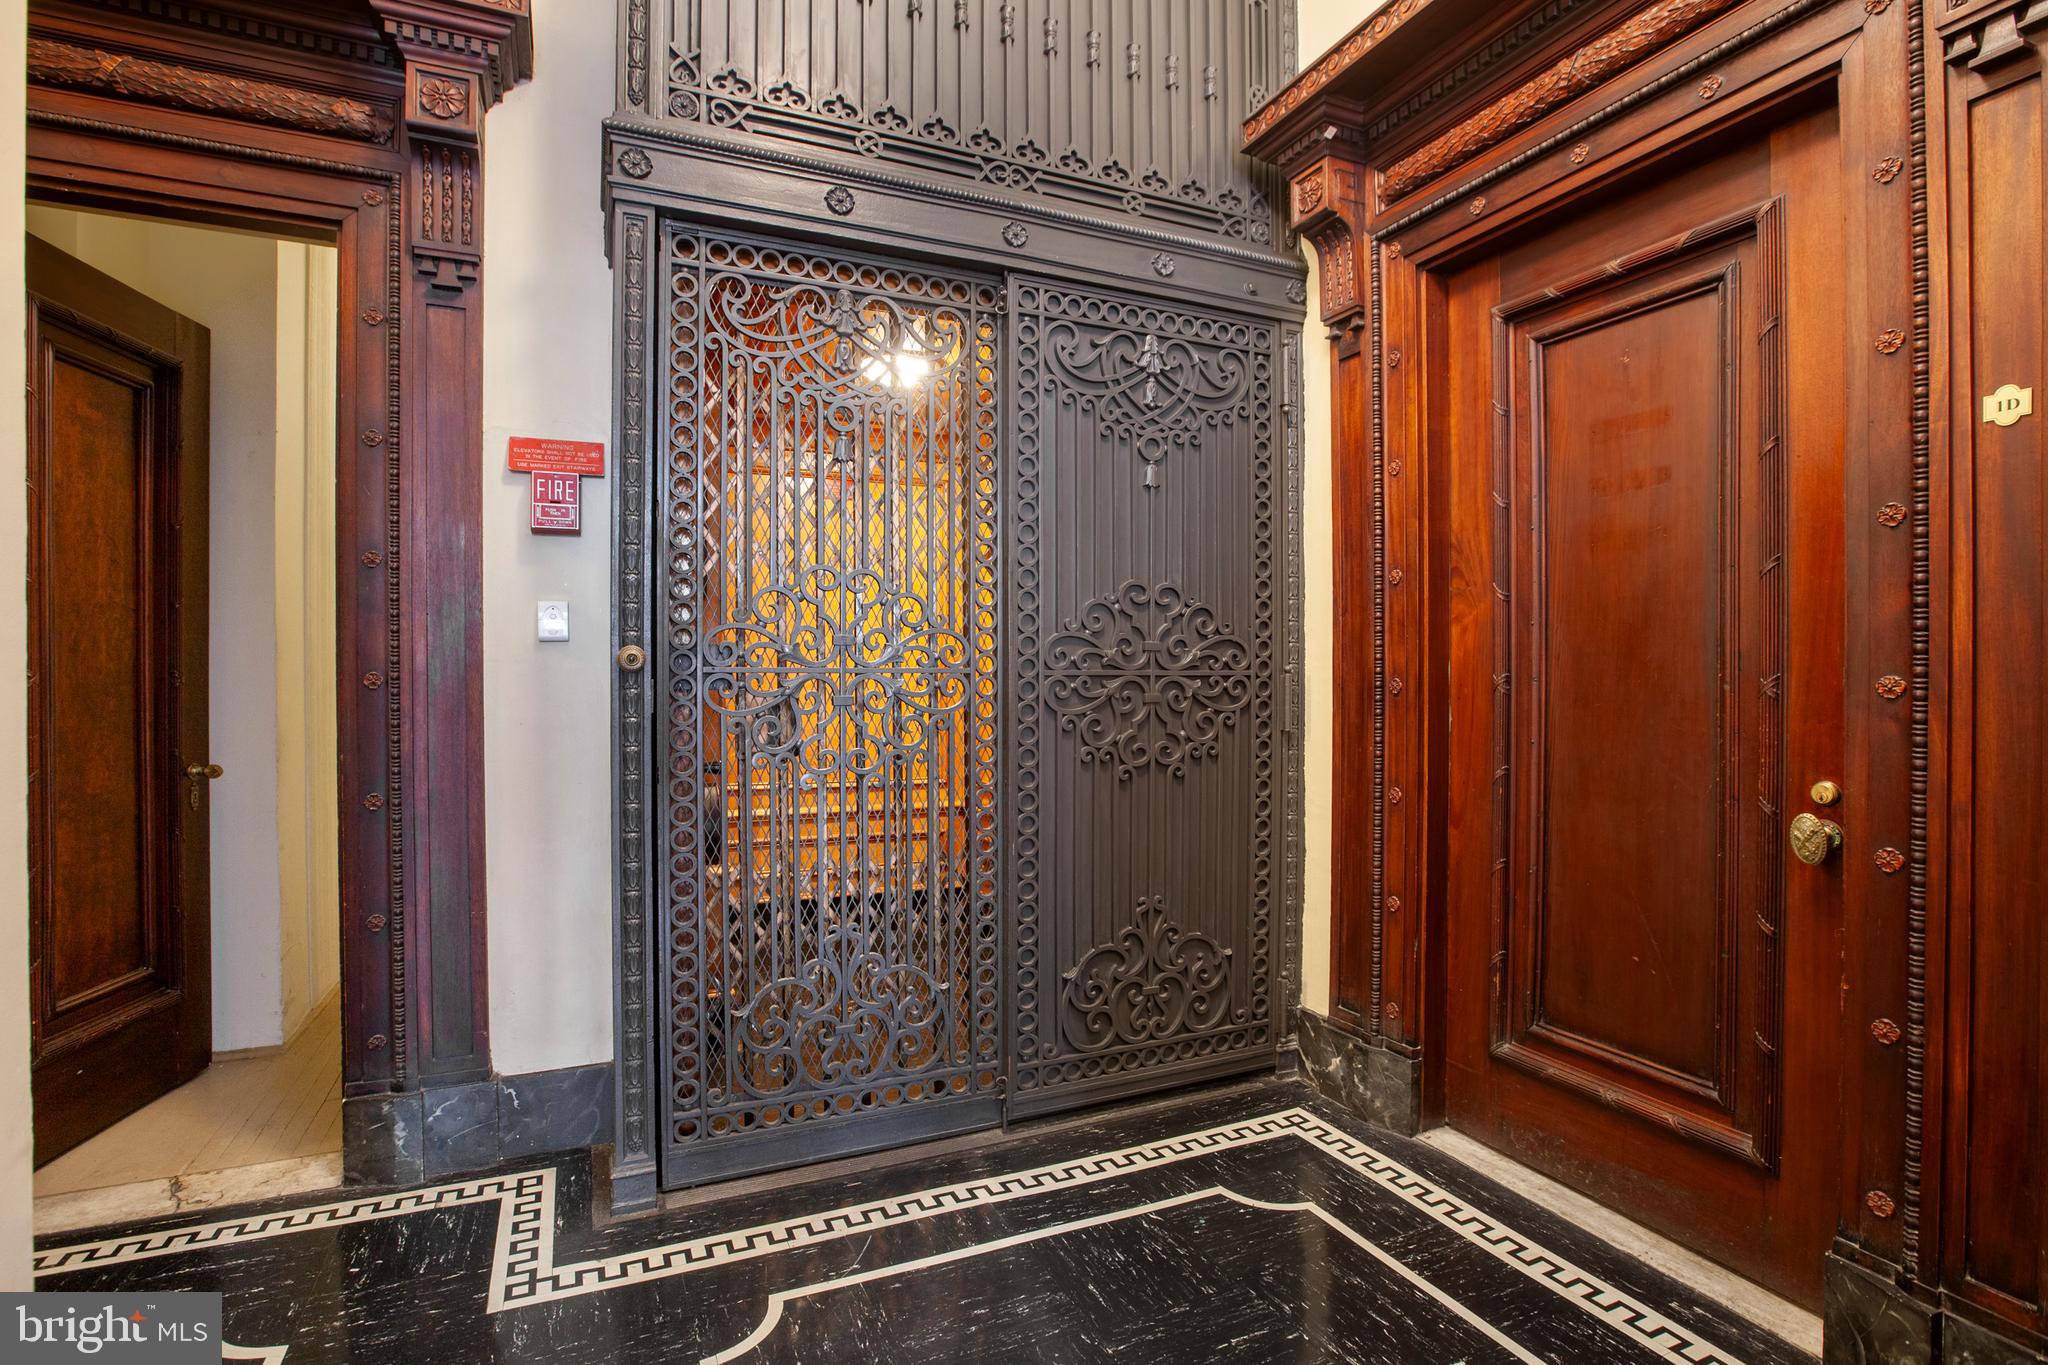 a view of a entryway door of the house